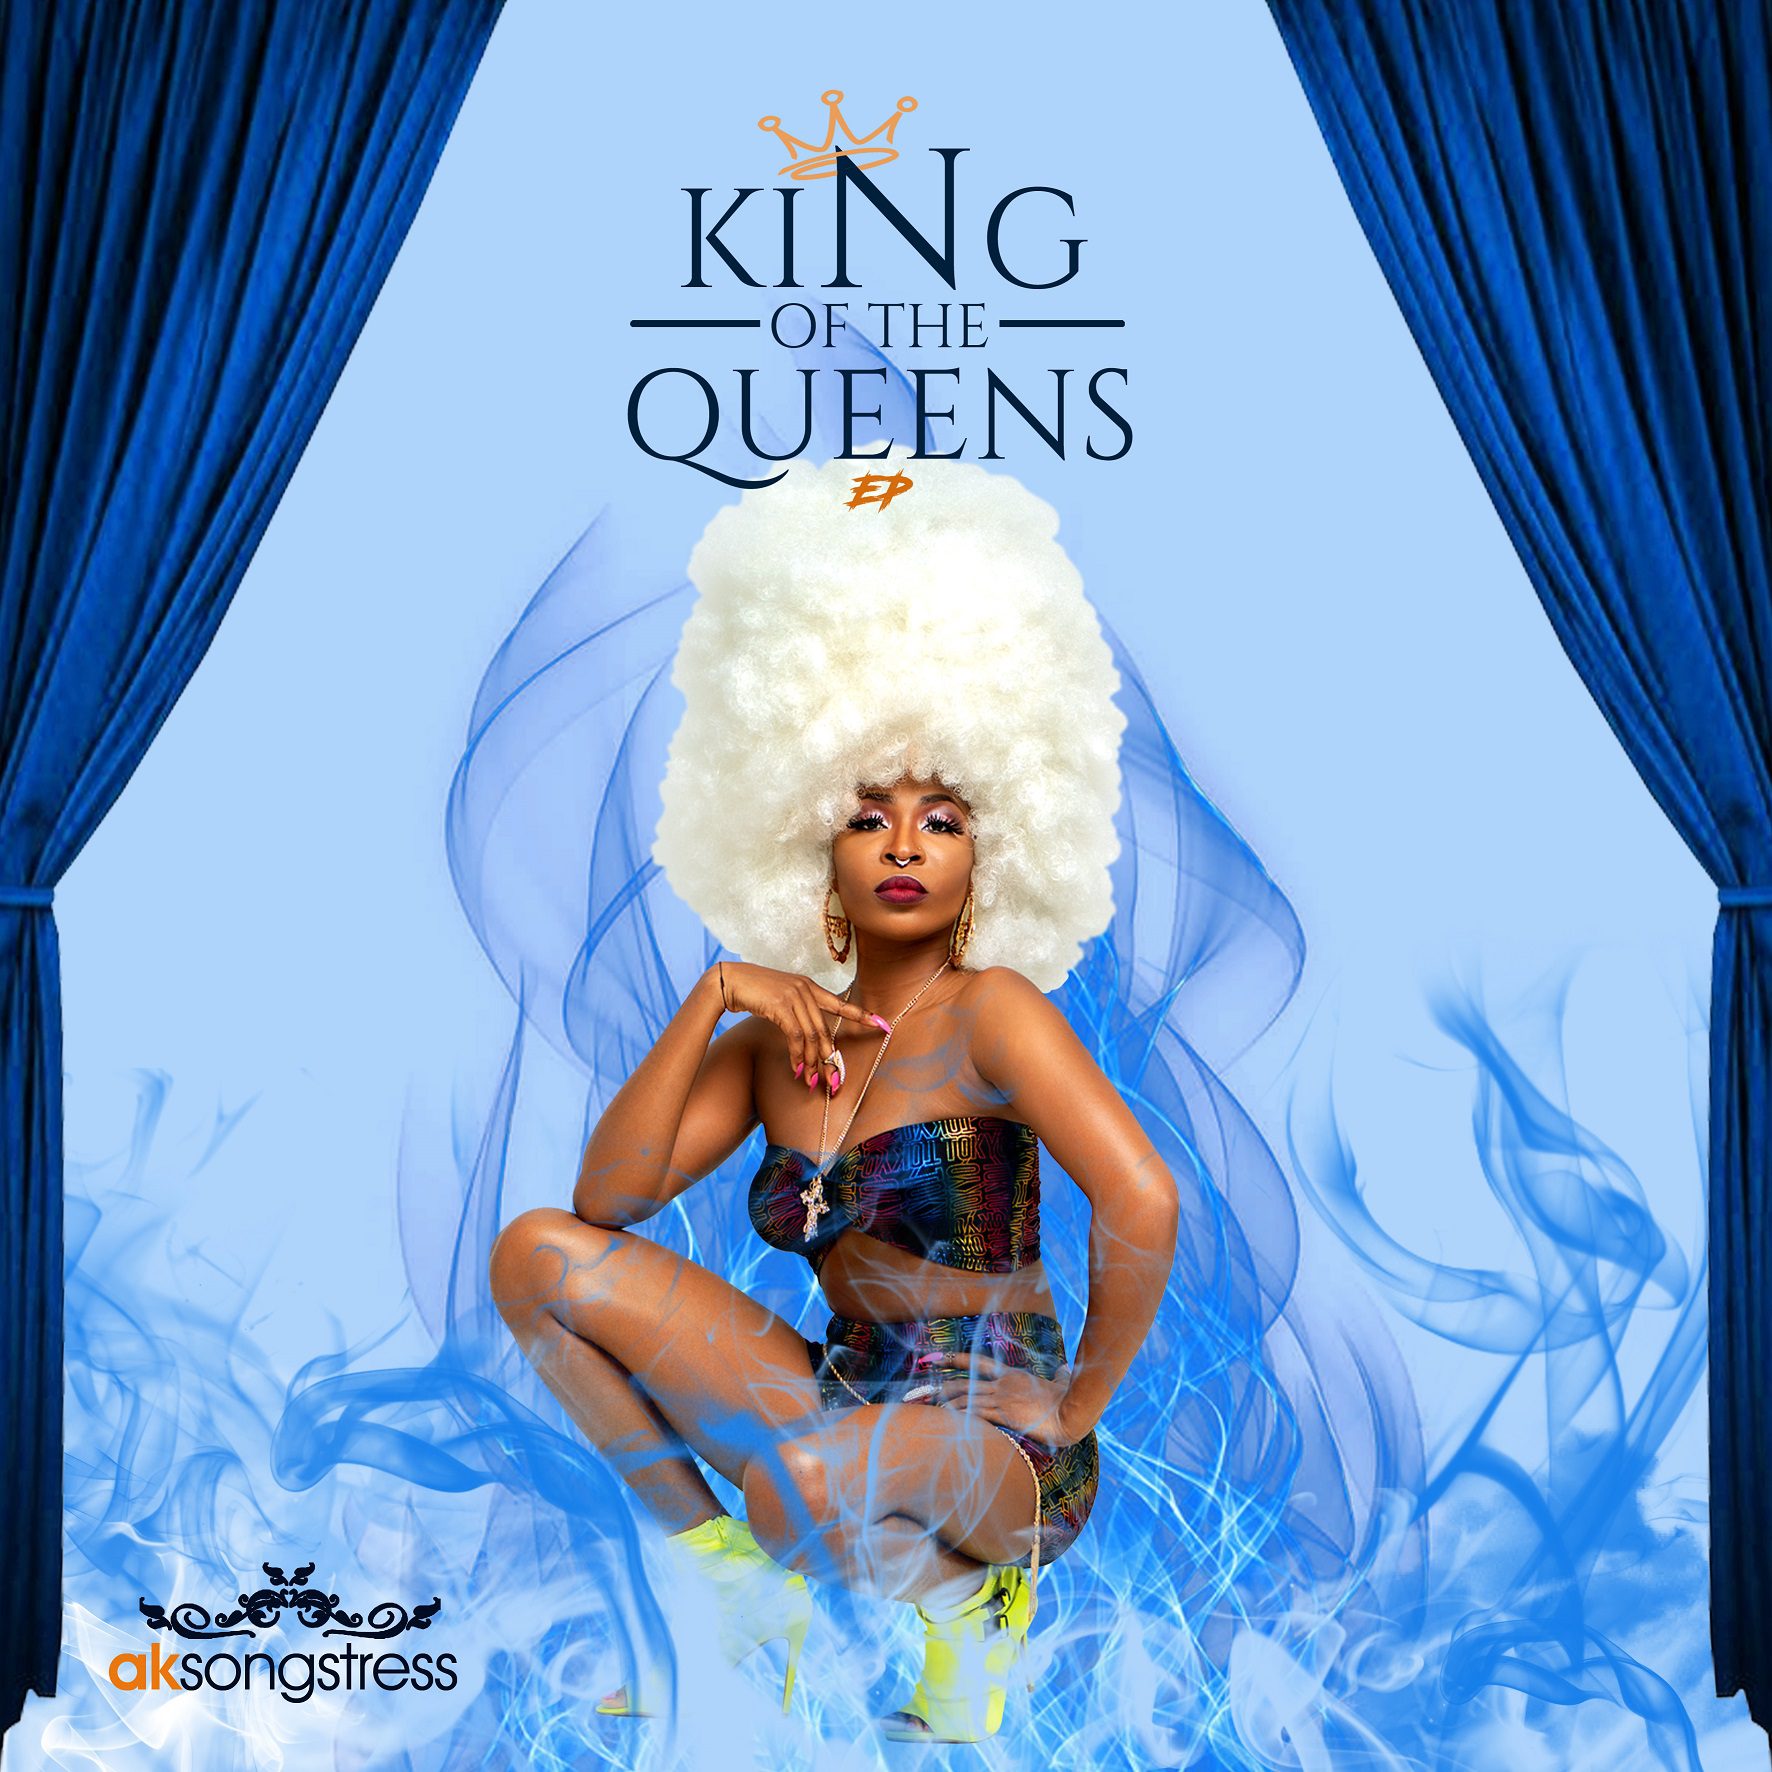 AK Songstress Enlists 4 Songs For “King Of The Queens” – Drops Officially On October 12.